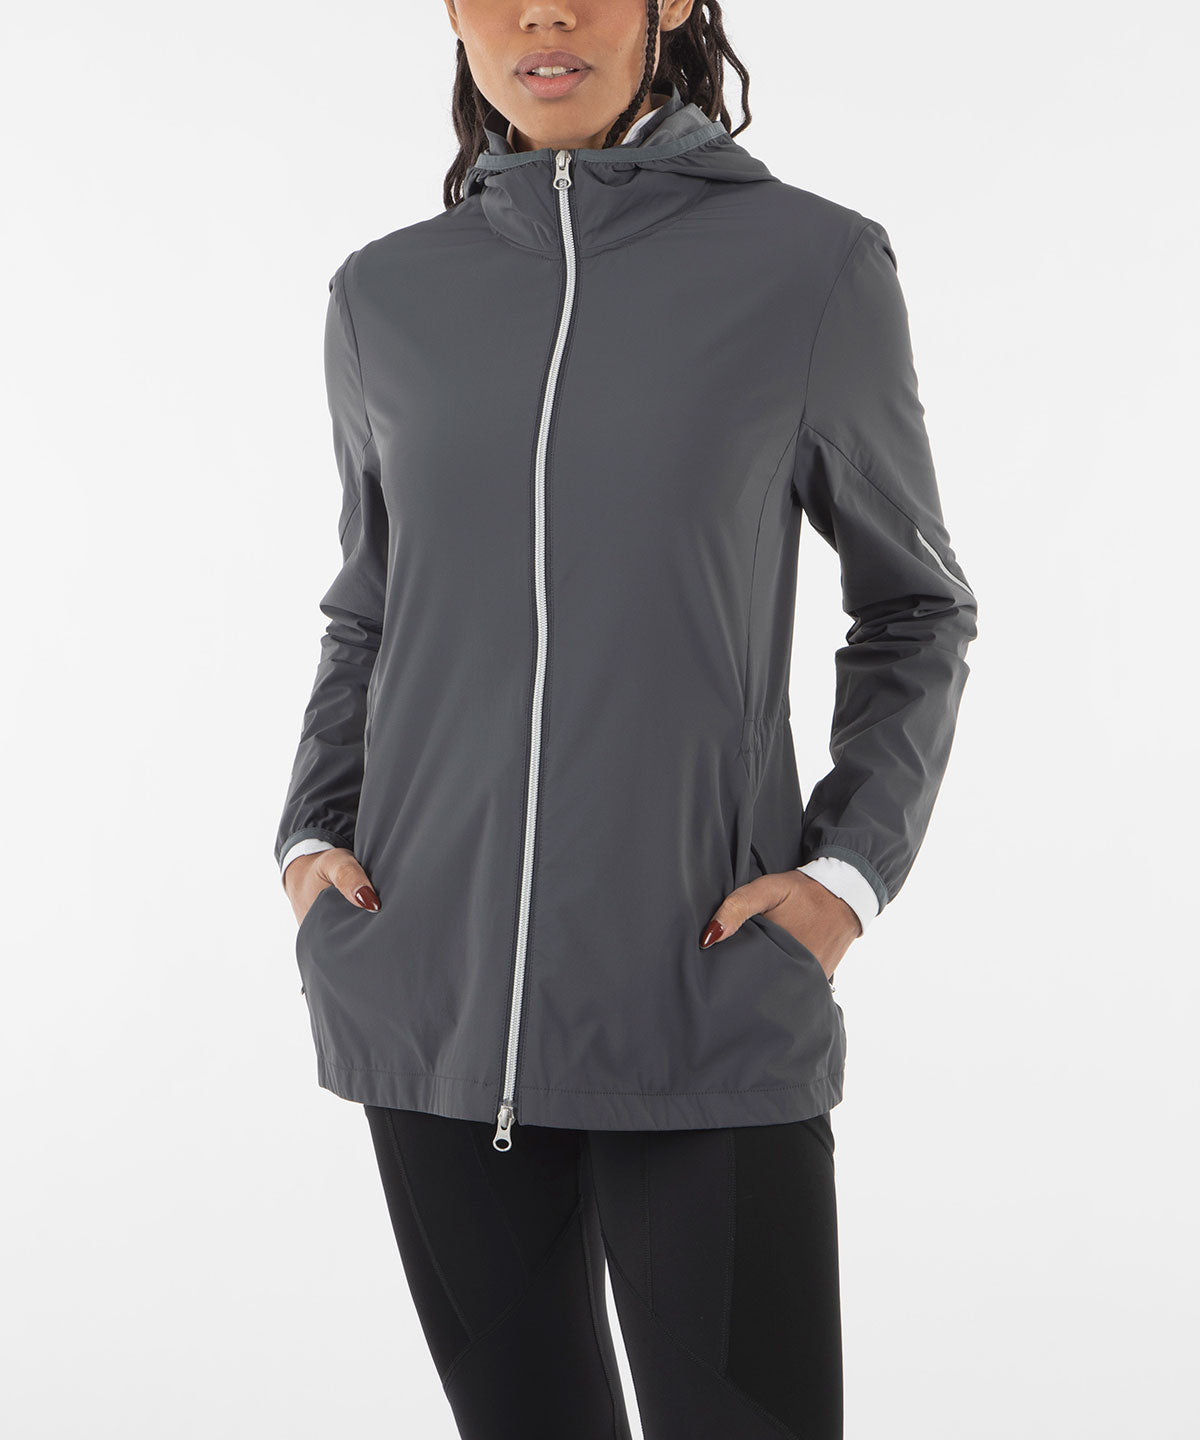 Lululemon Coats And Jackets Sale Canada - Up To 60% OFF Now